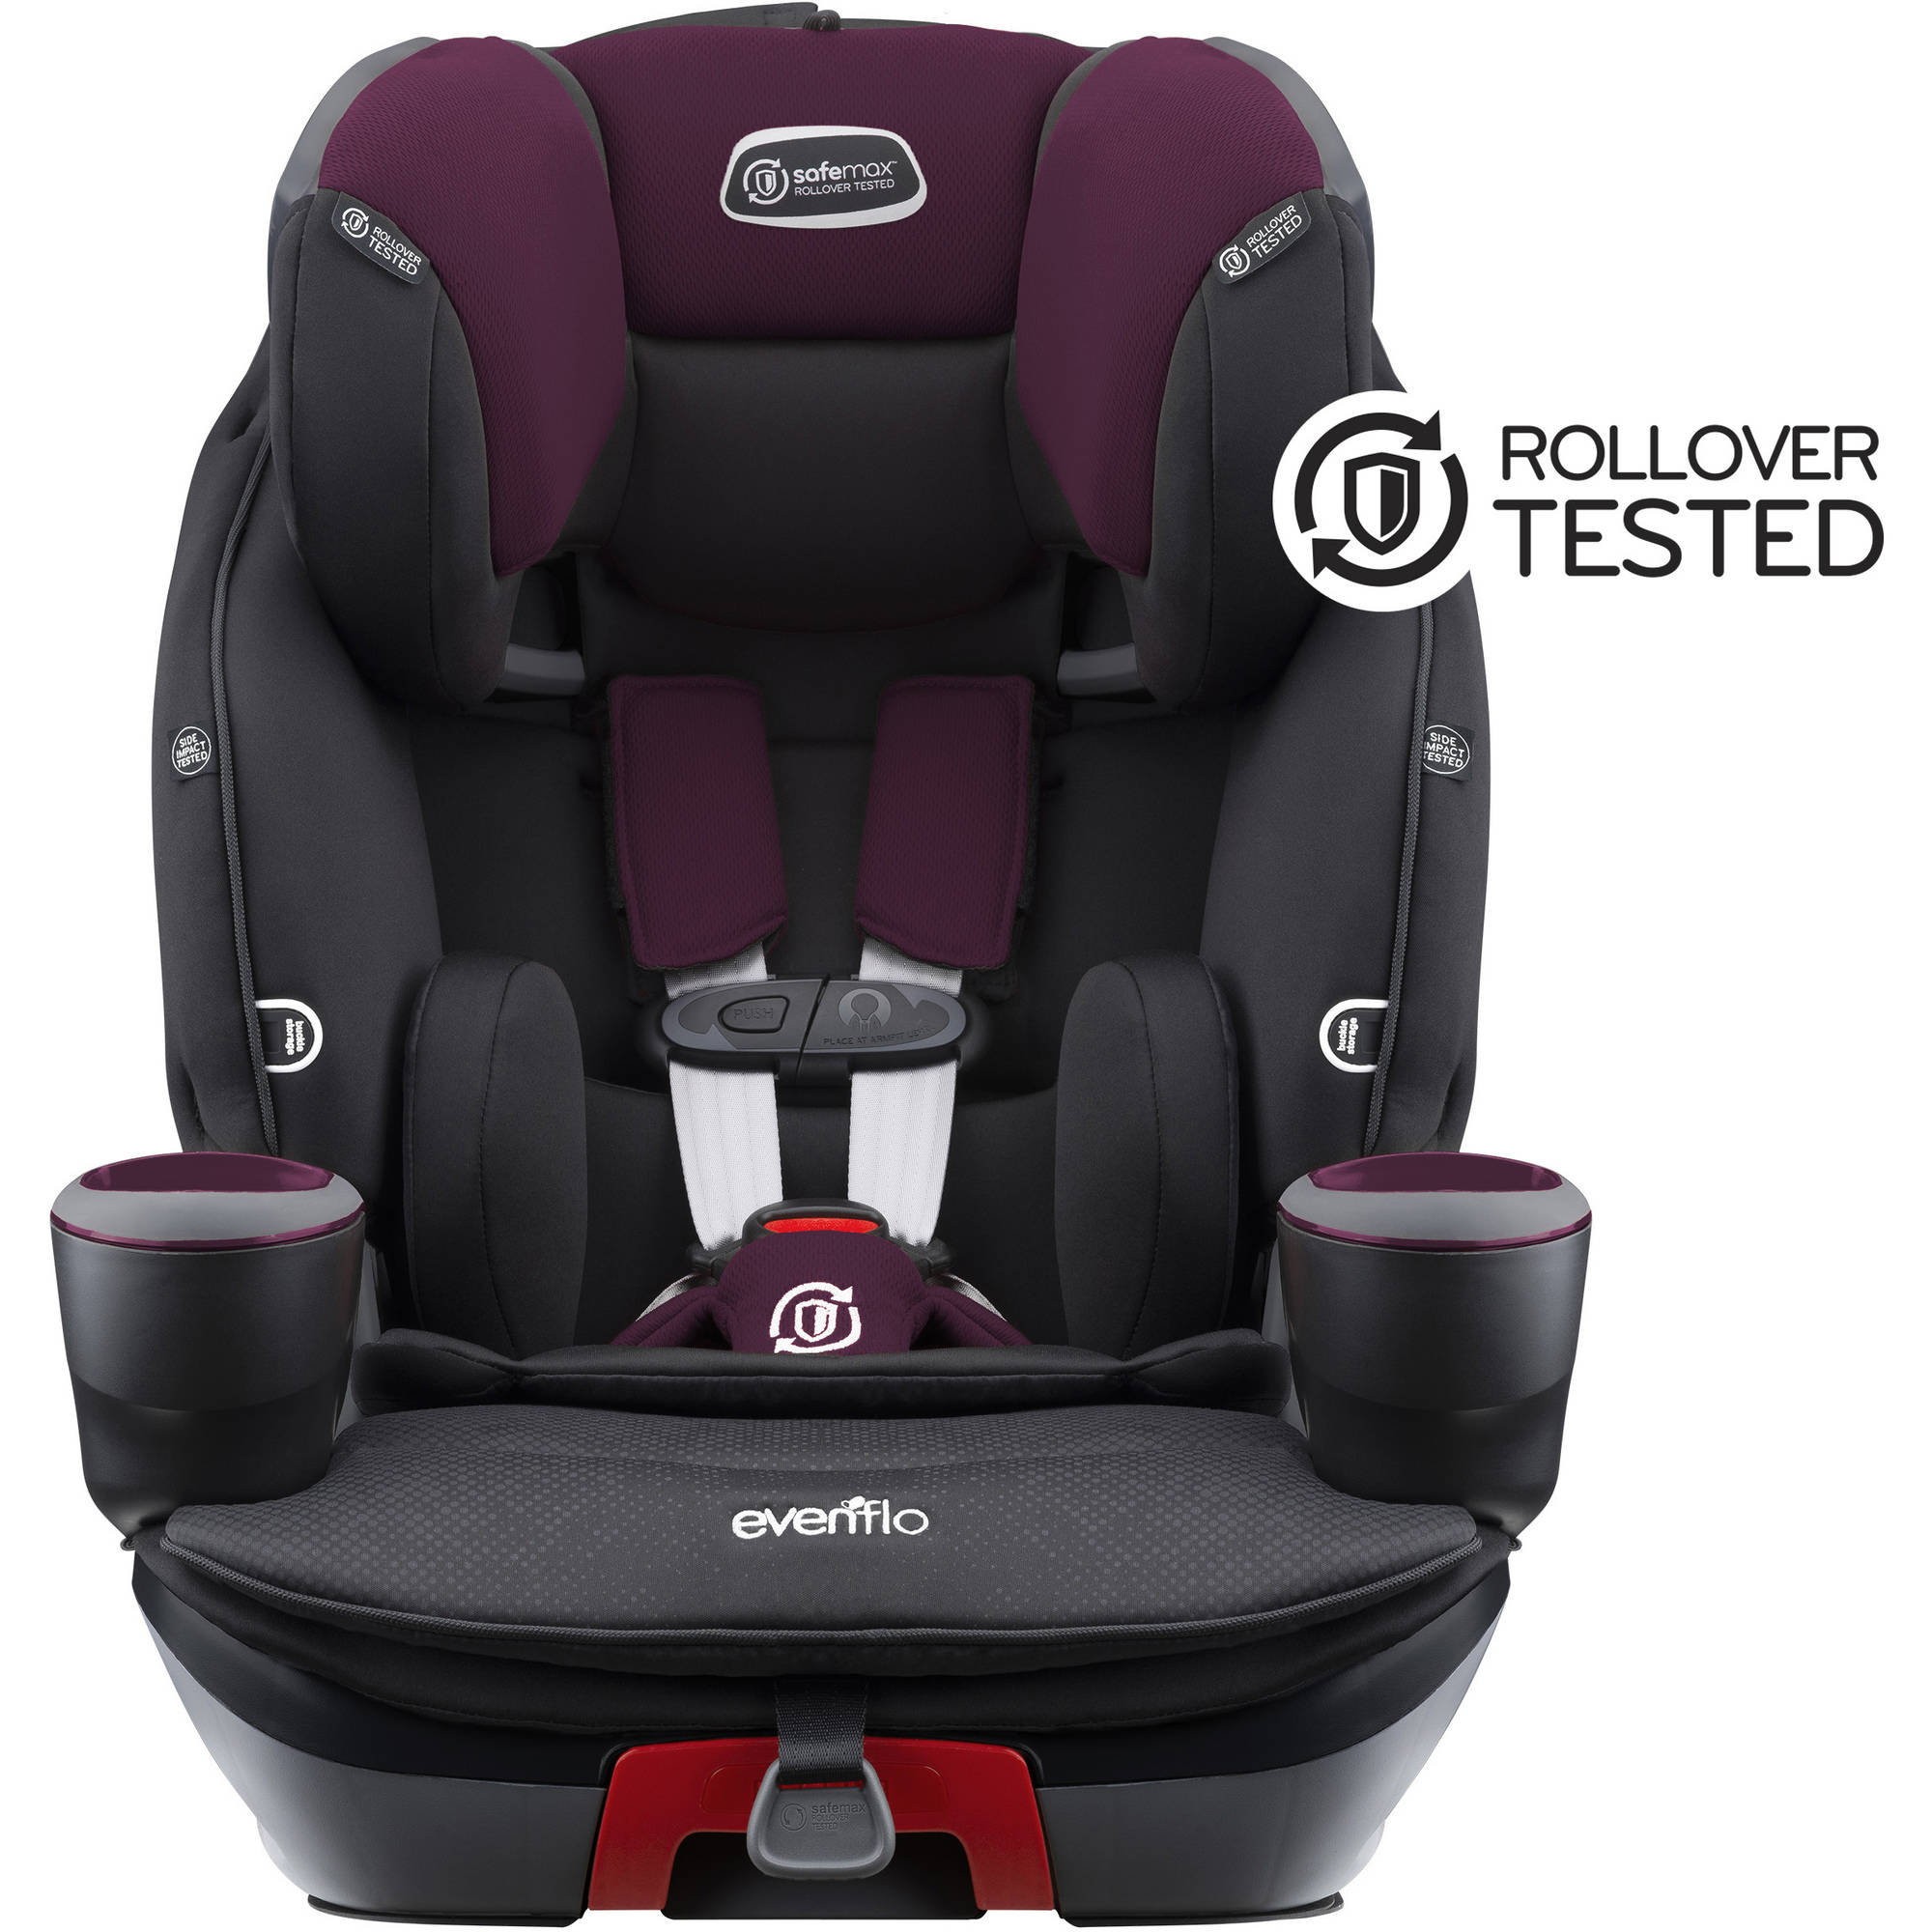 Evenflo SafeMax 3-in-1 Harness Booster Car Seat, Purple Berry - image 3 of 17